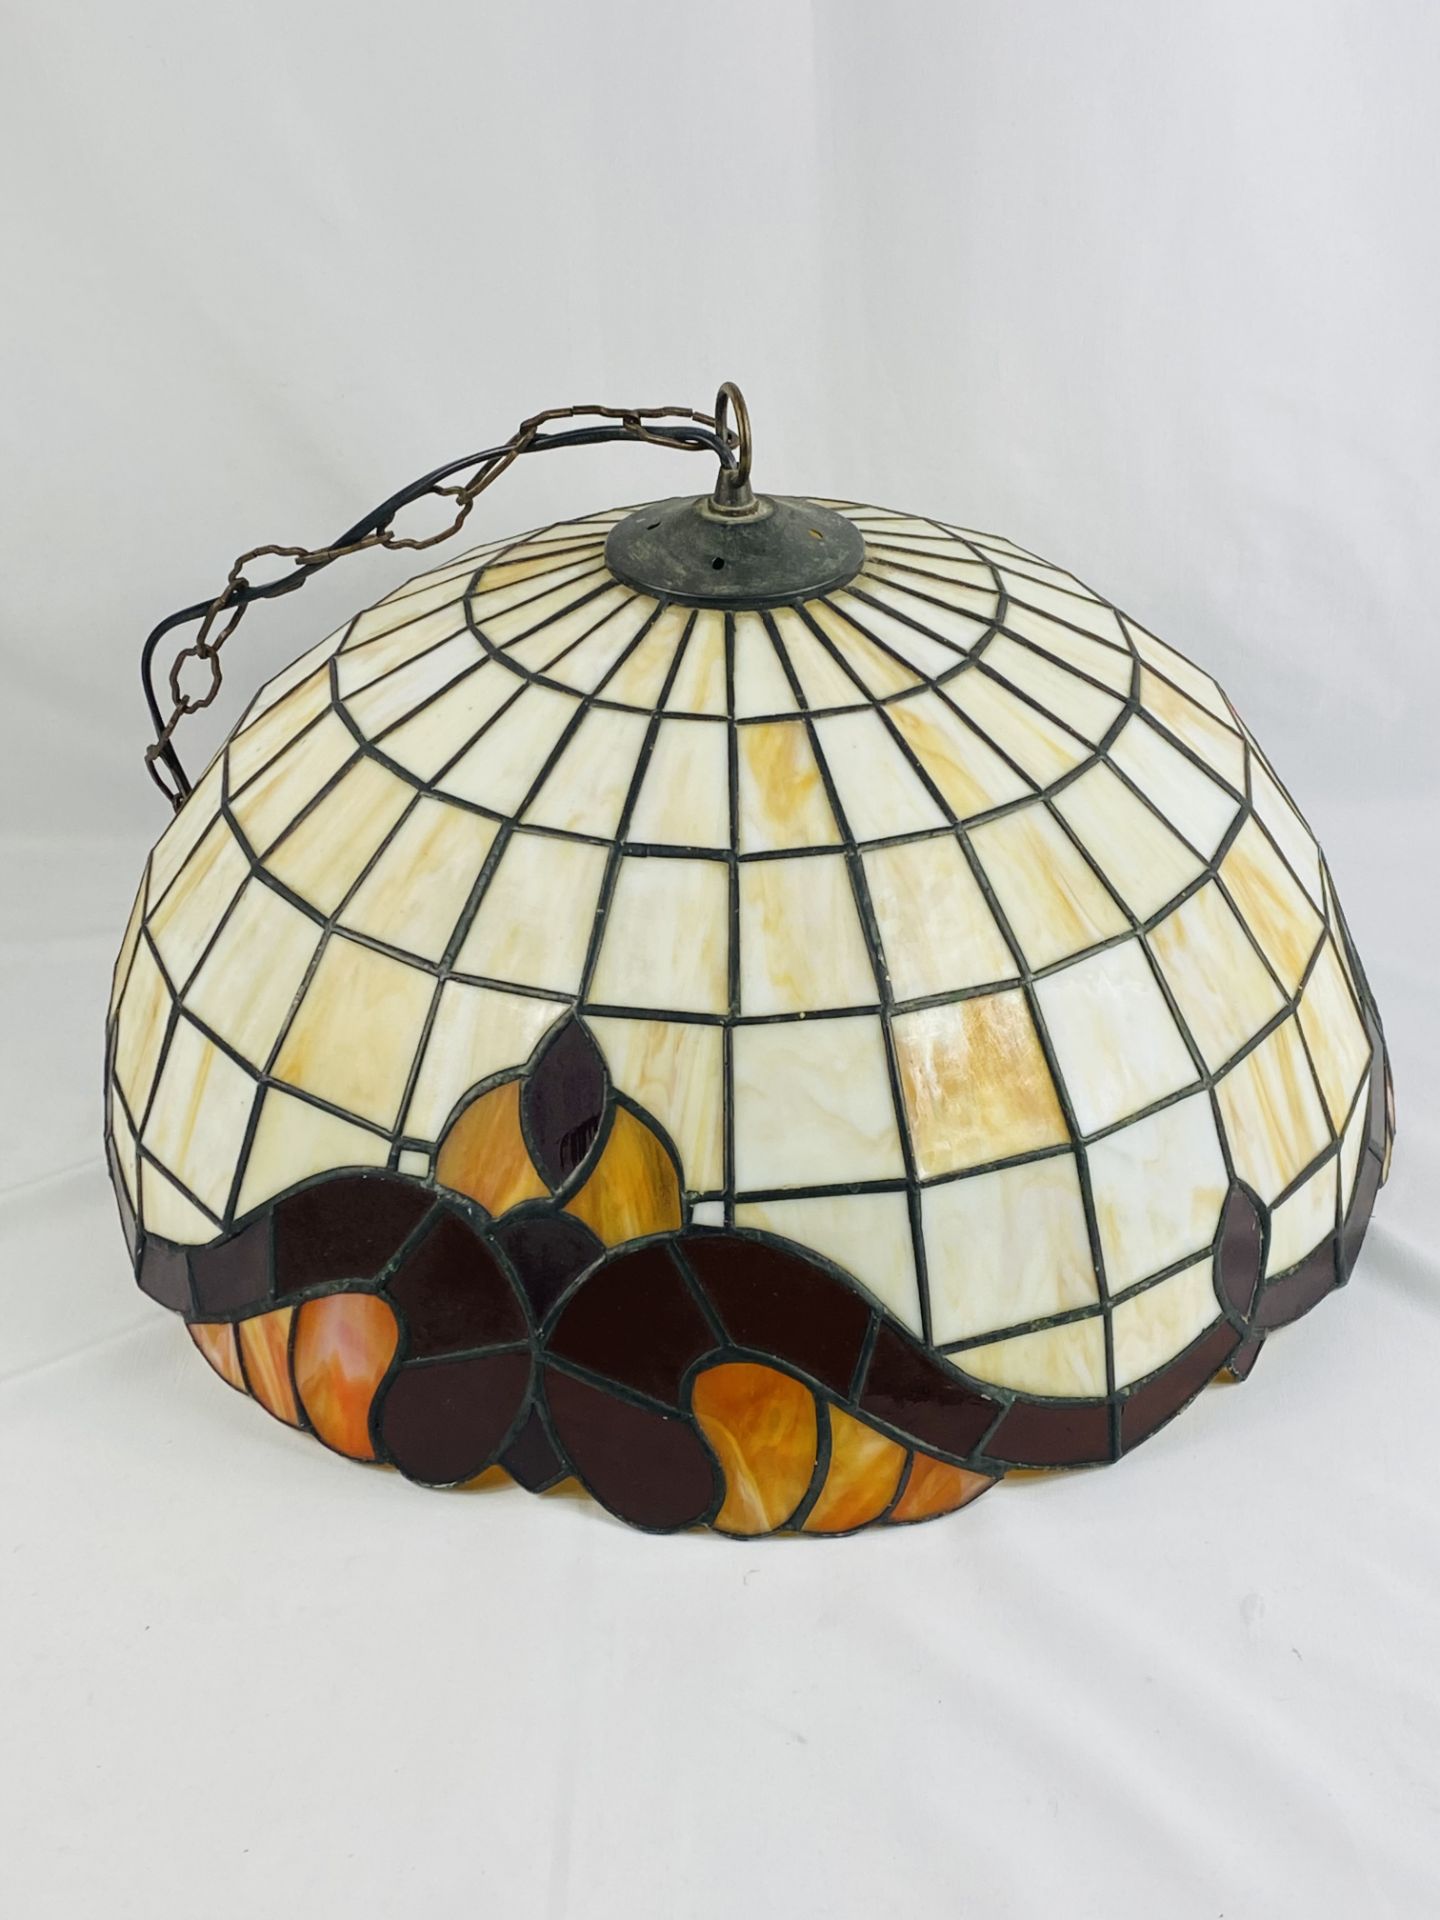 Tiffany style ceiling lamp - Image 2 of 6